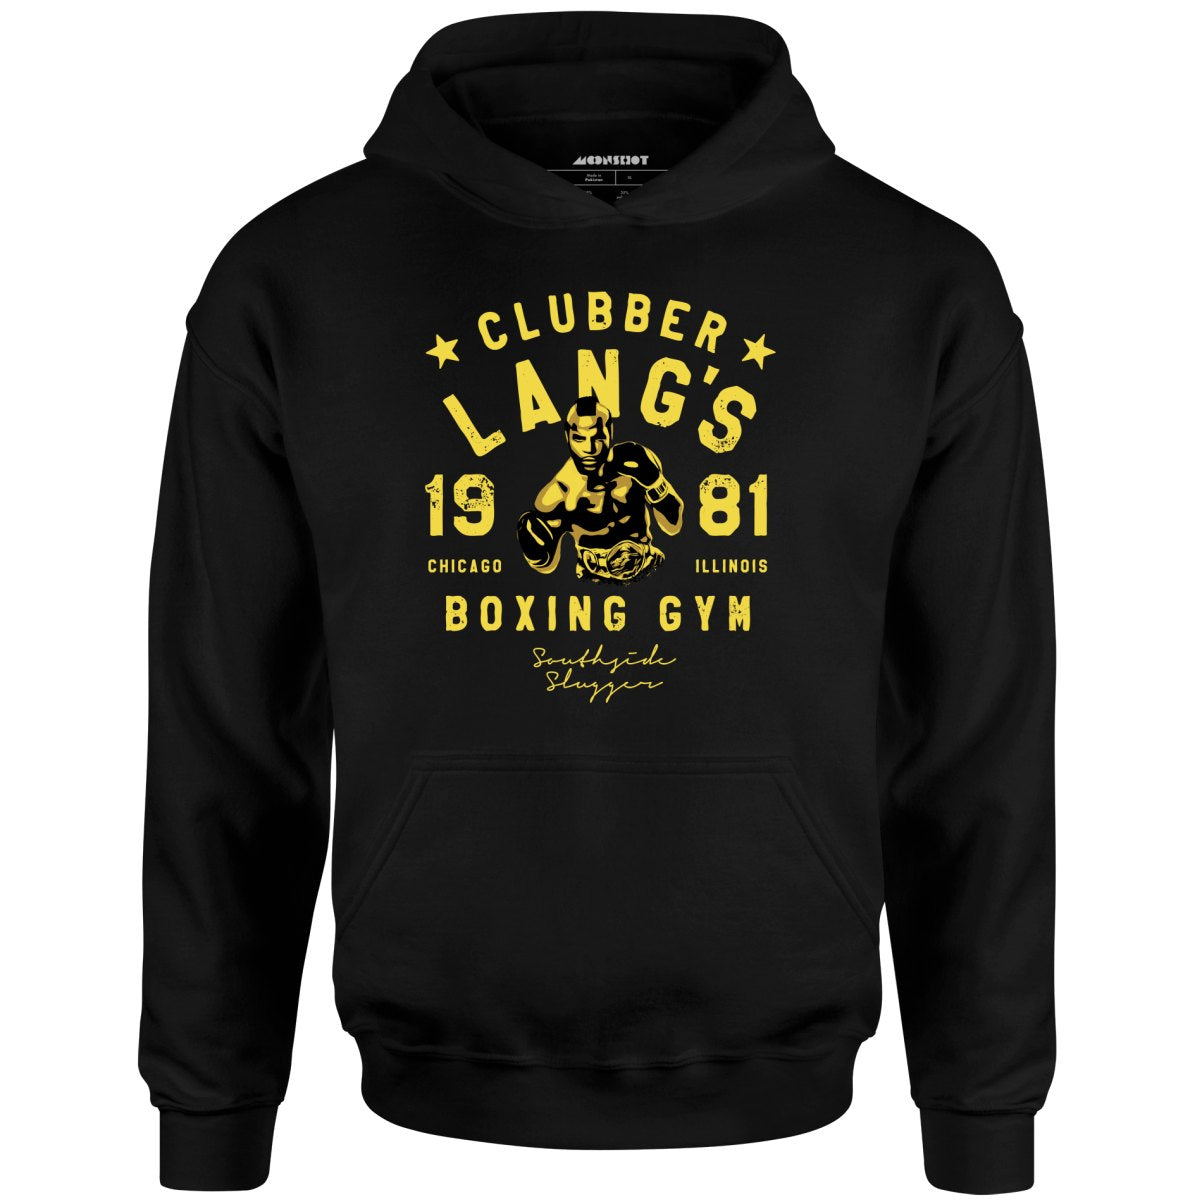 Clubber Lang's Boxing Gym - Unisex Hoodie